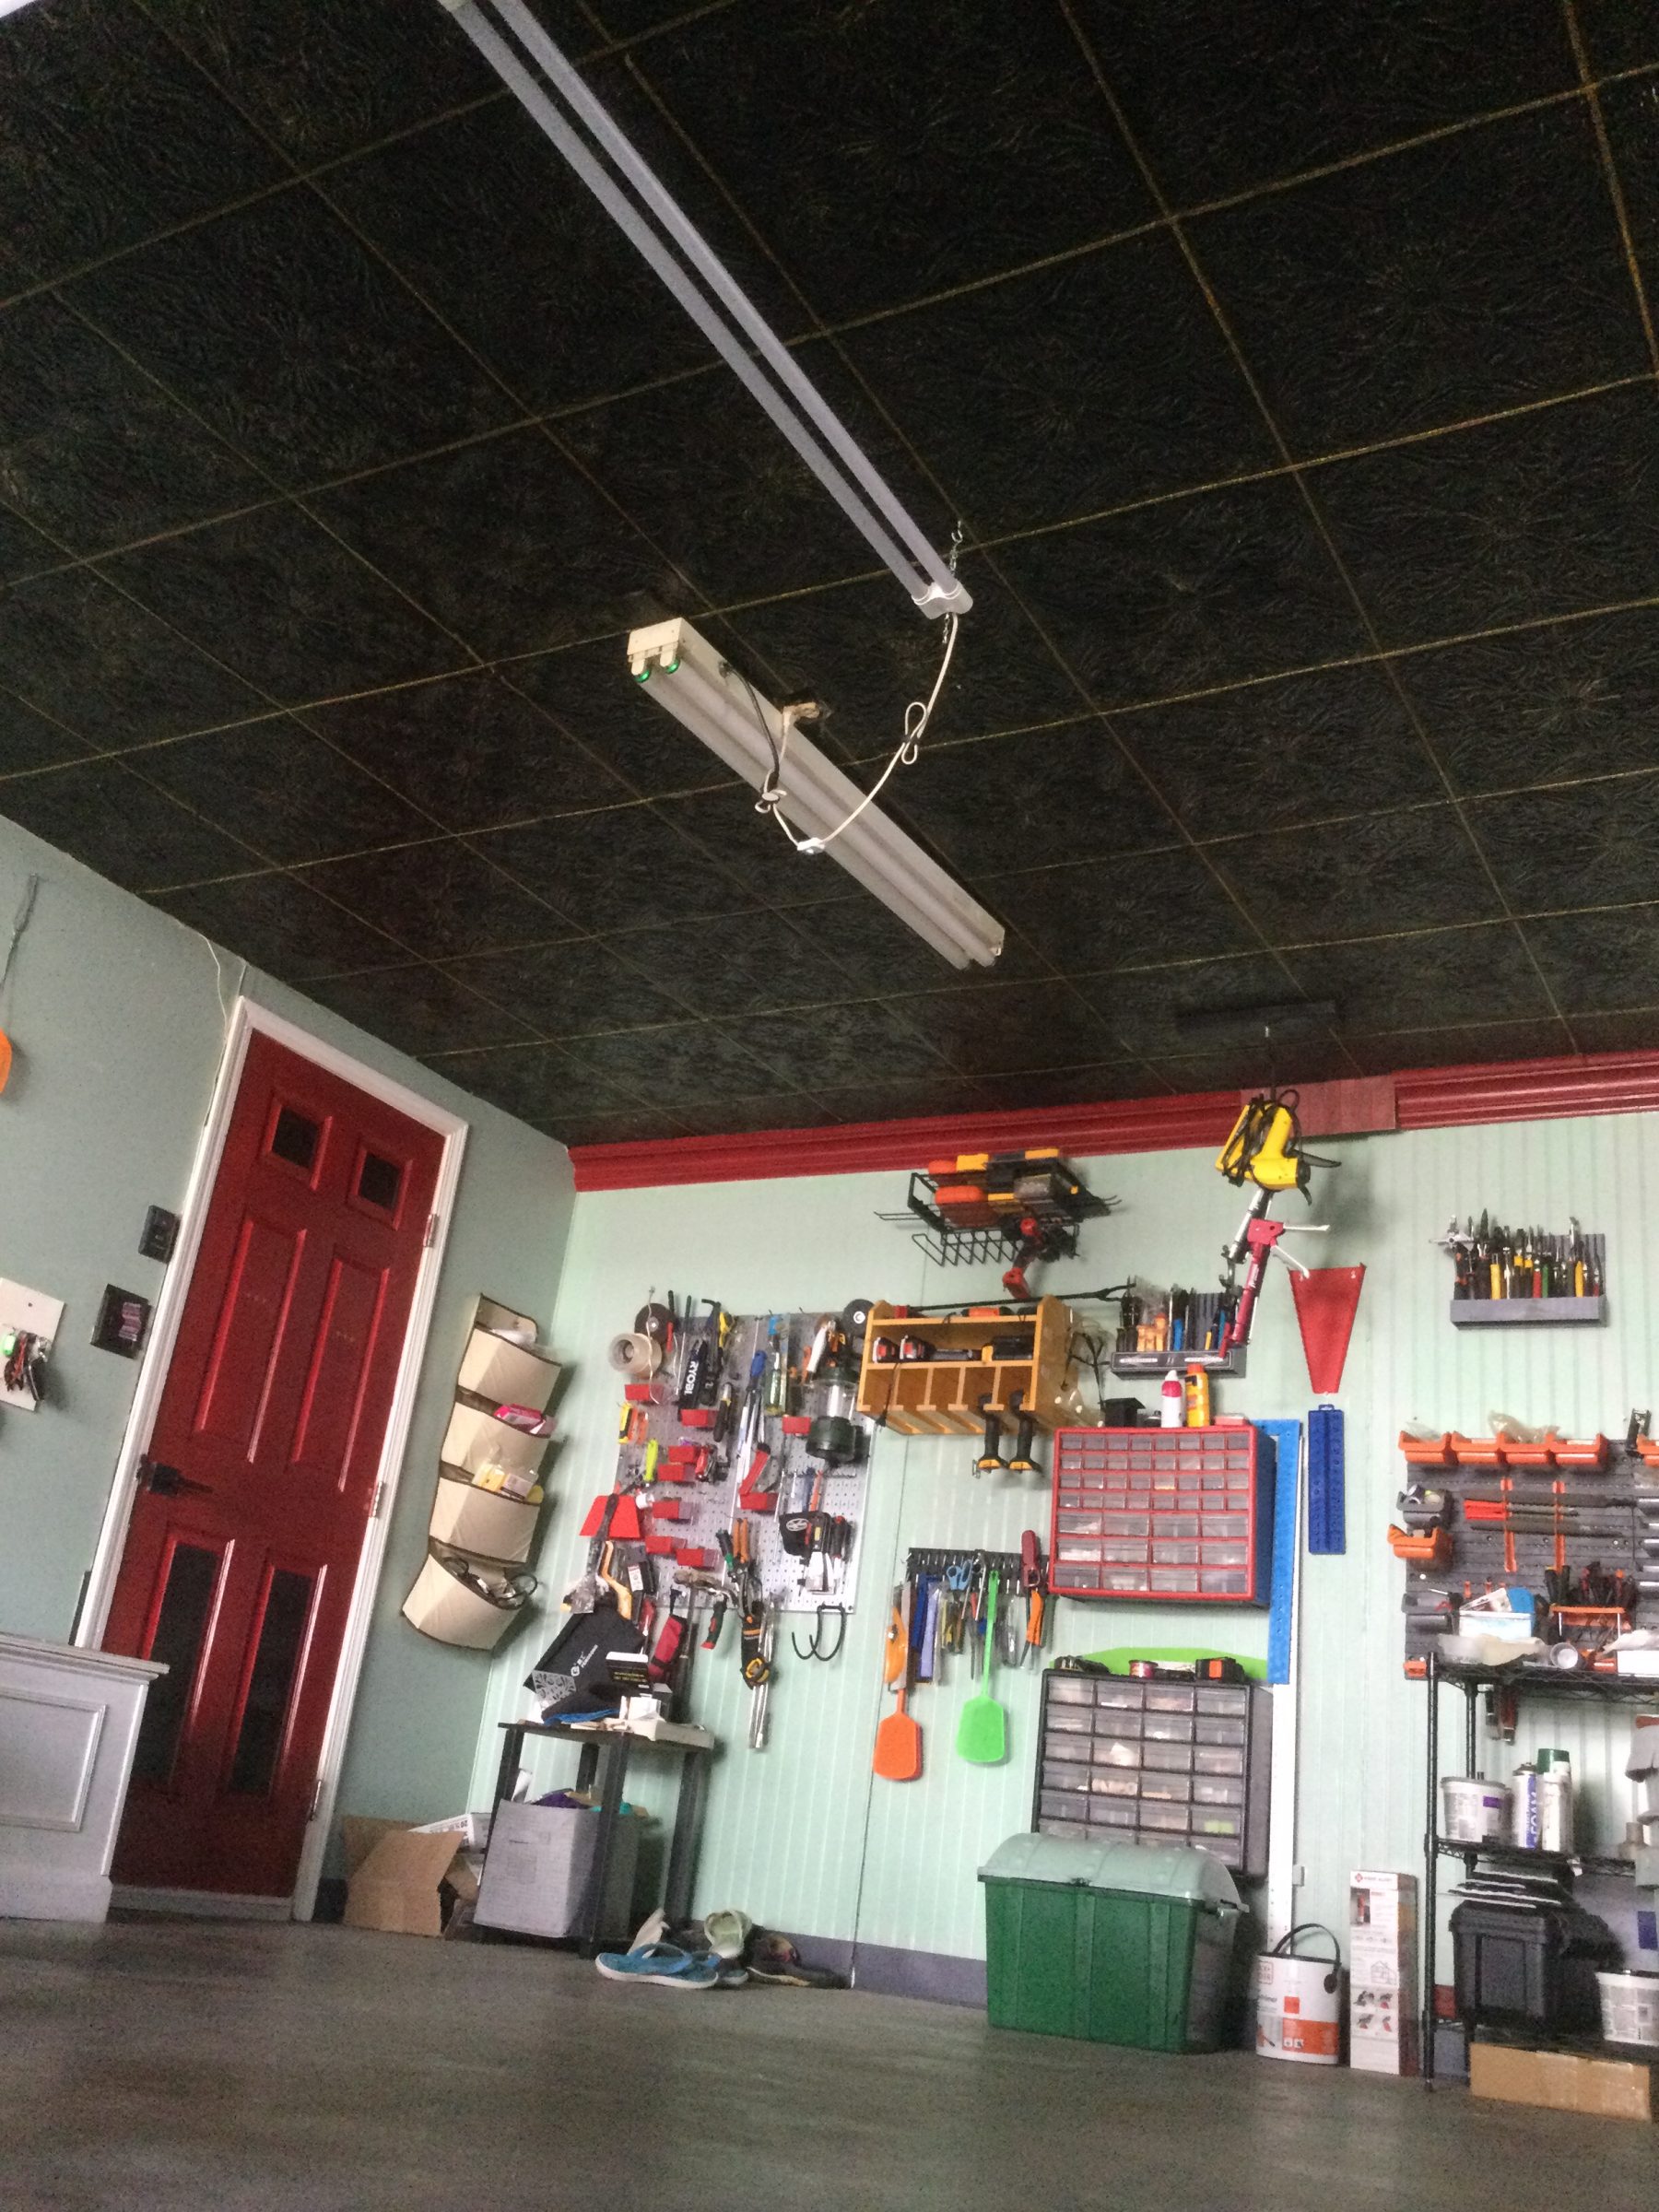 drab to fab new look for garage ceiling